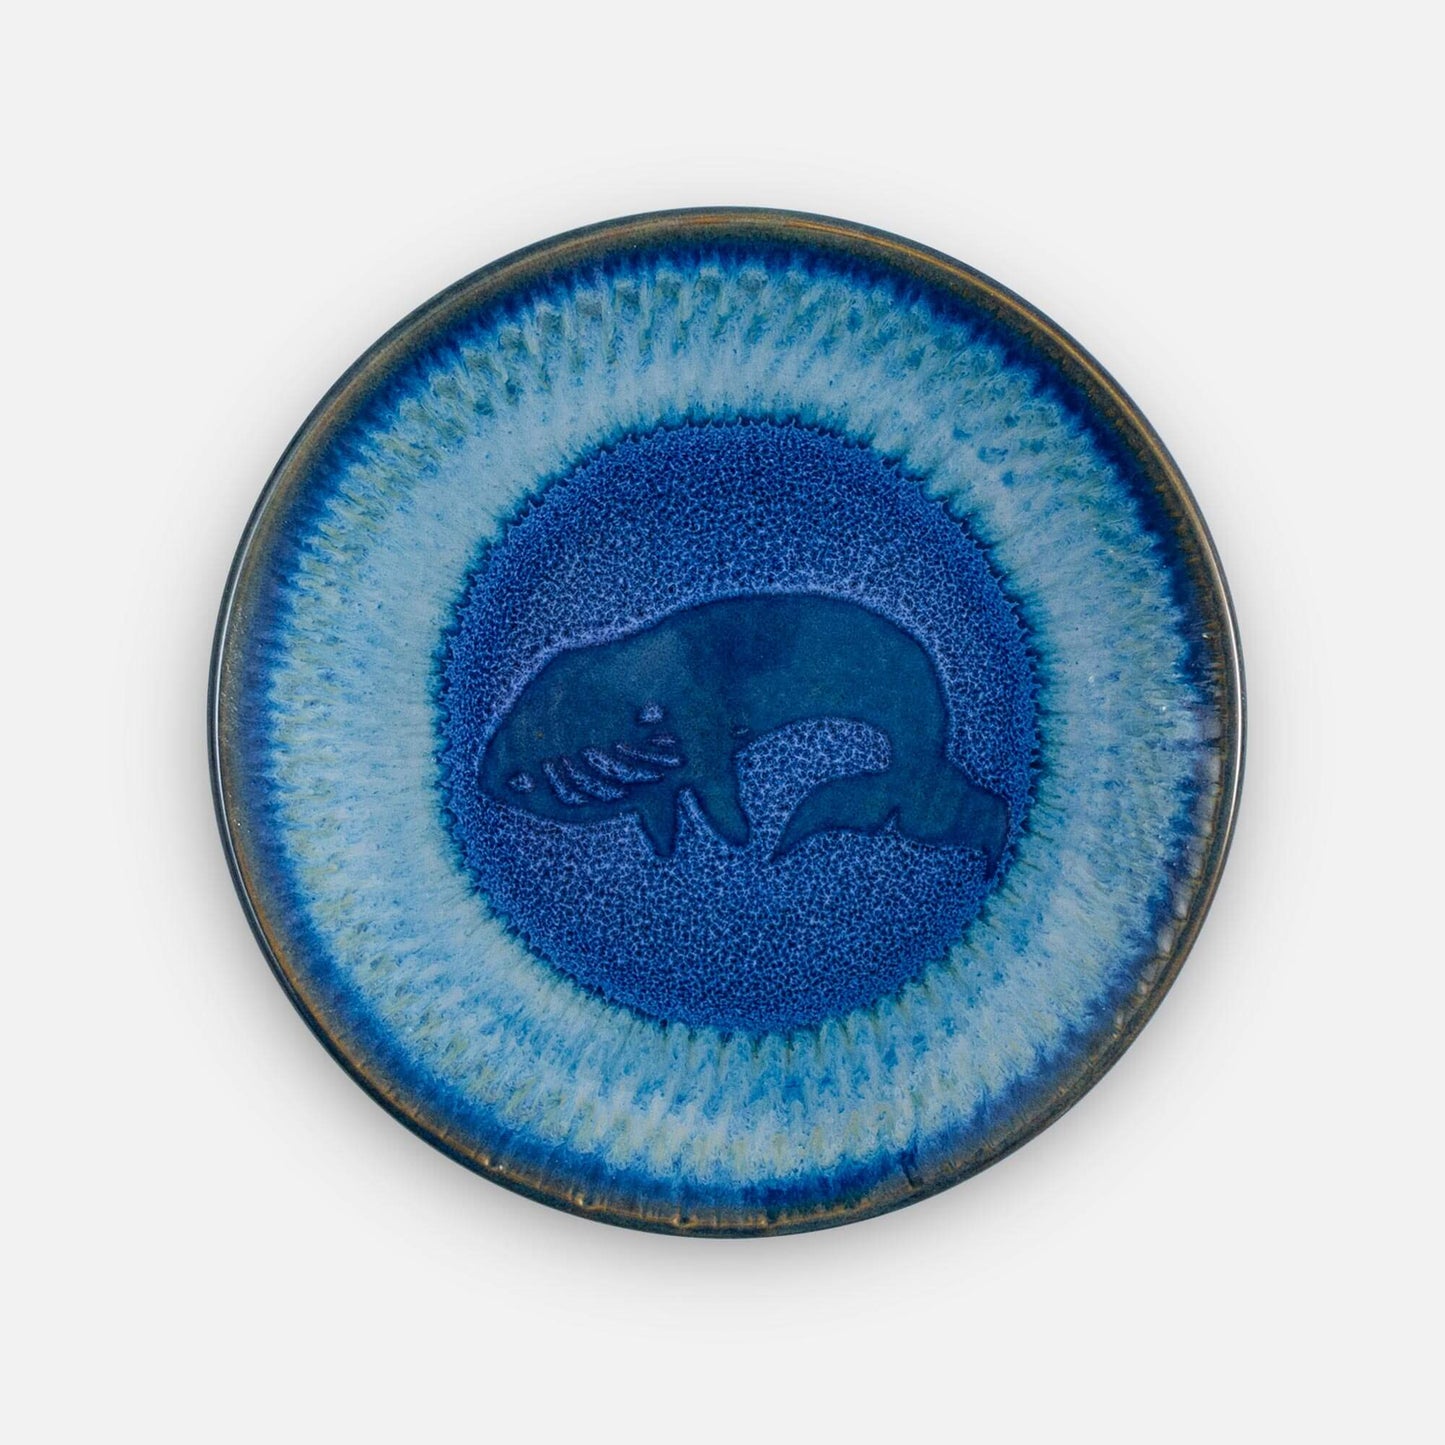 Handmade Pottery Rimless Dinner Plate made by Georgetown Pottery in Maine in Blue Whale Pattern